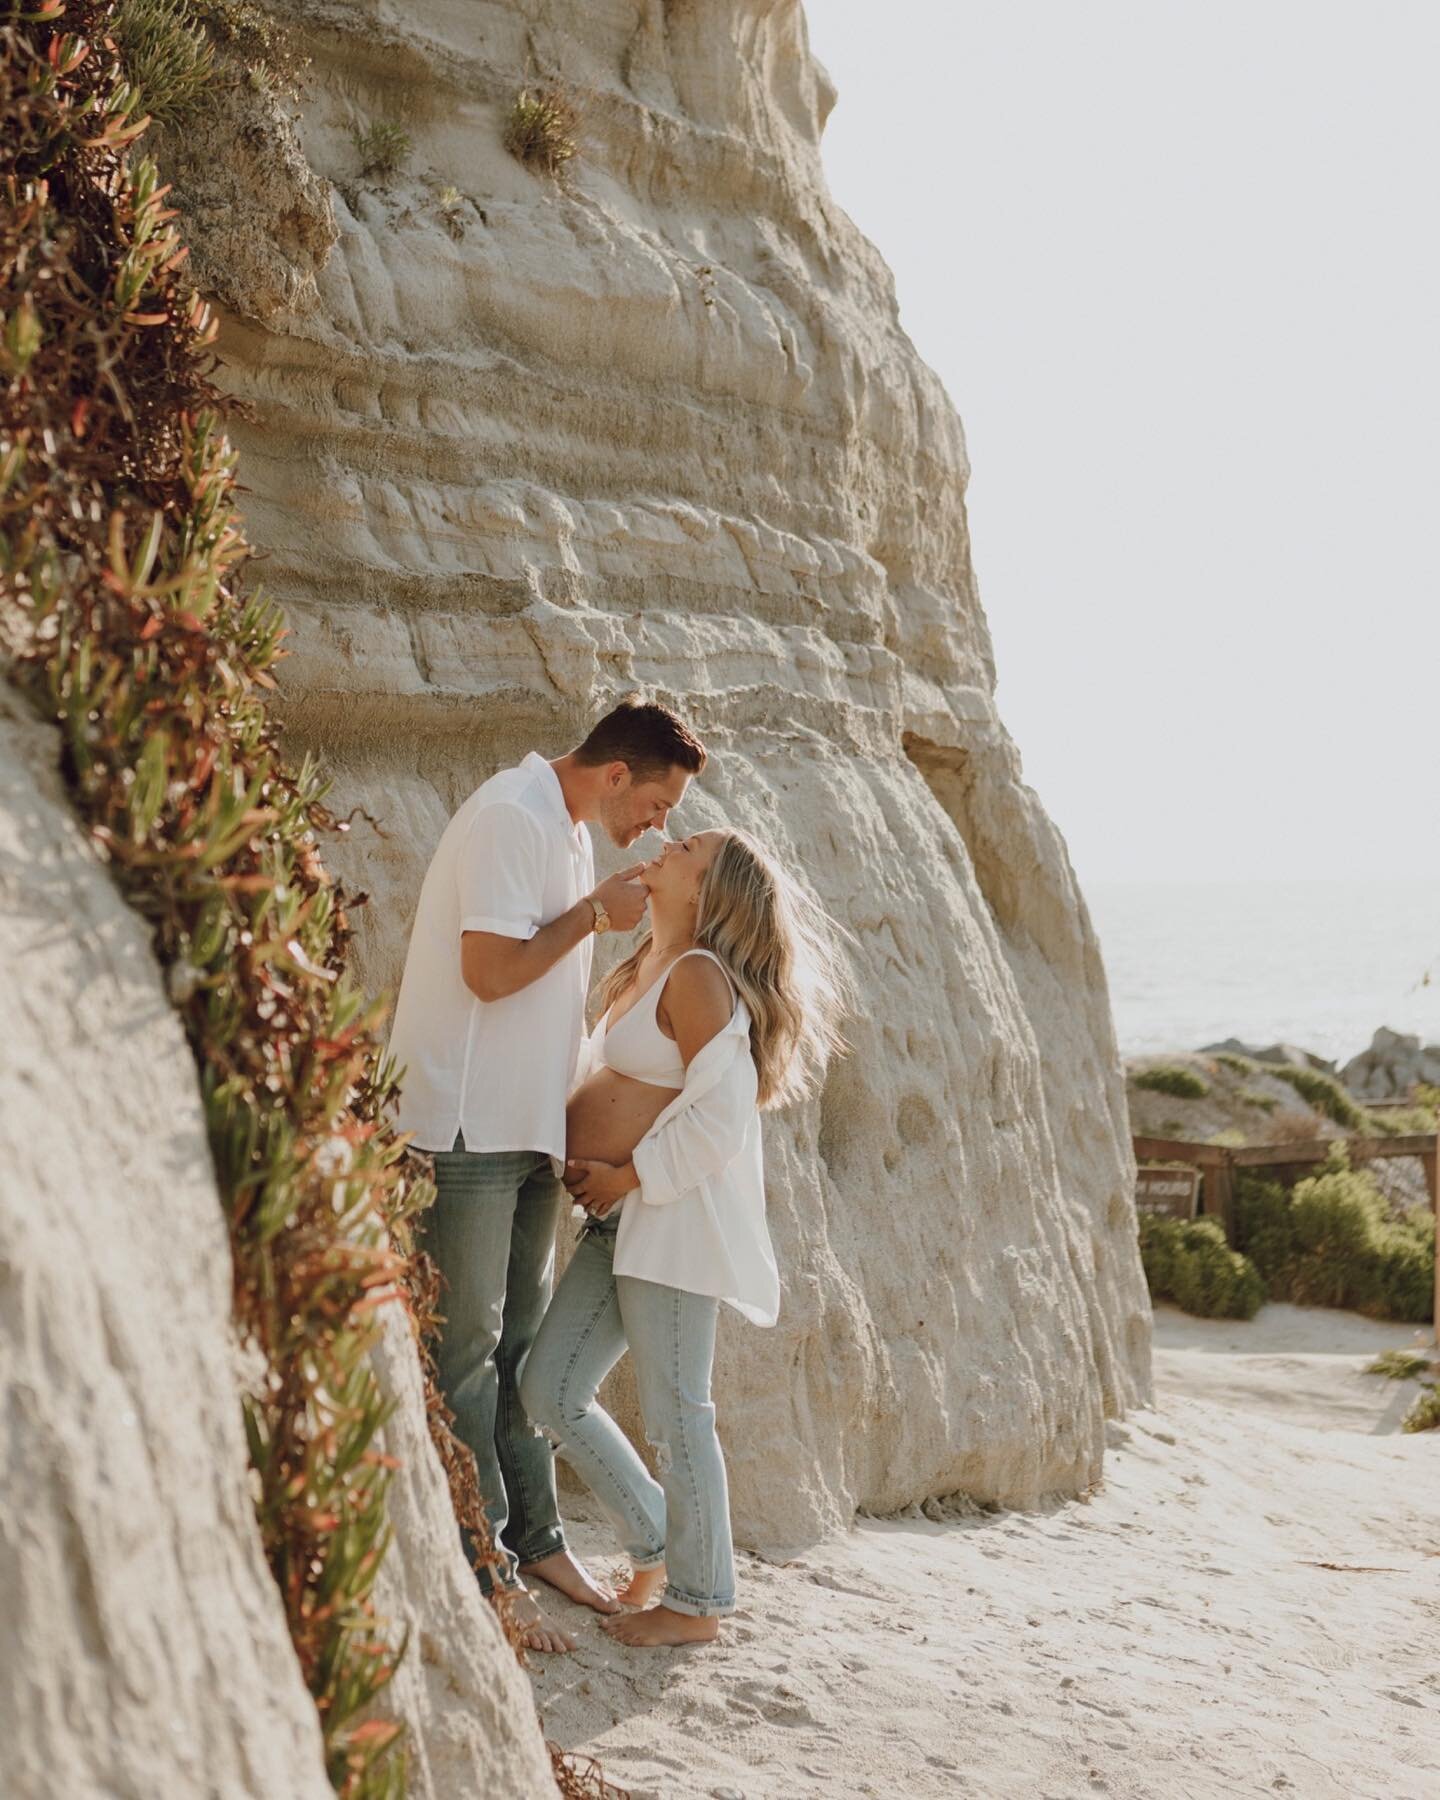 Brooke + Colton + babygirl by the sea🌊🌼🤍

#sandiegoweddingphotographer #sandiegofamilyphotographer #sandiegomaternityphotographer #girlmama #maternityshoot #beachmaternityshoot #sanclementephotographer #sandiegophotographer